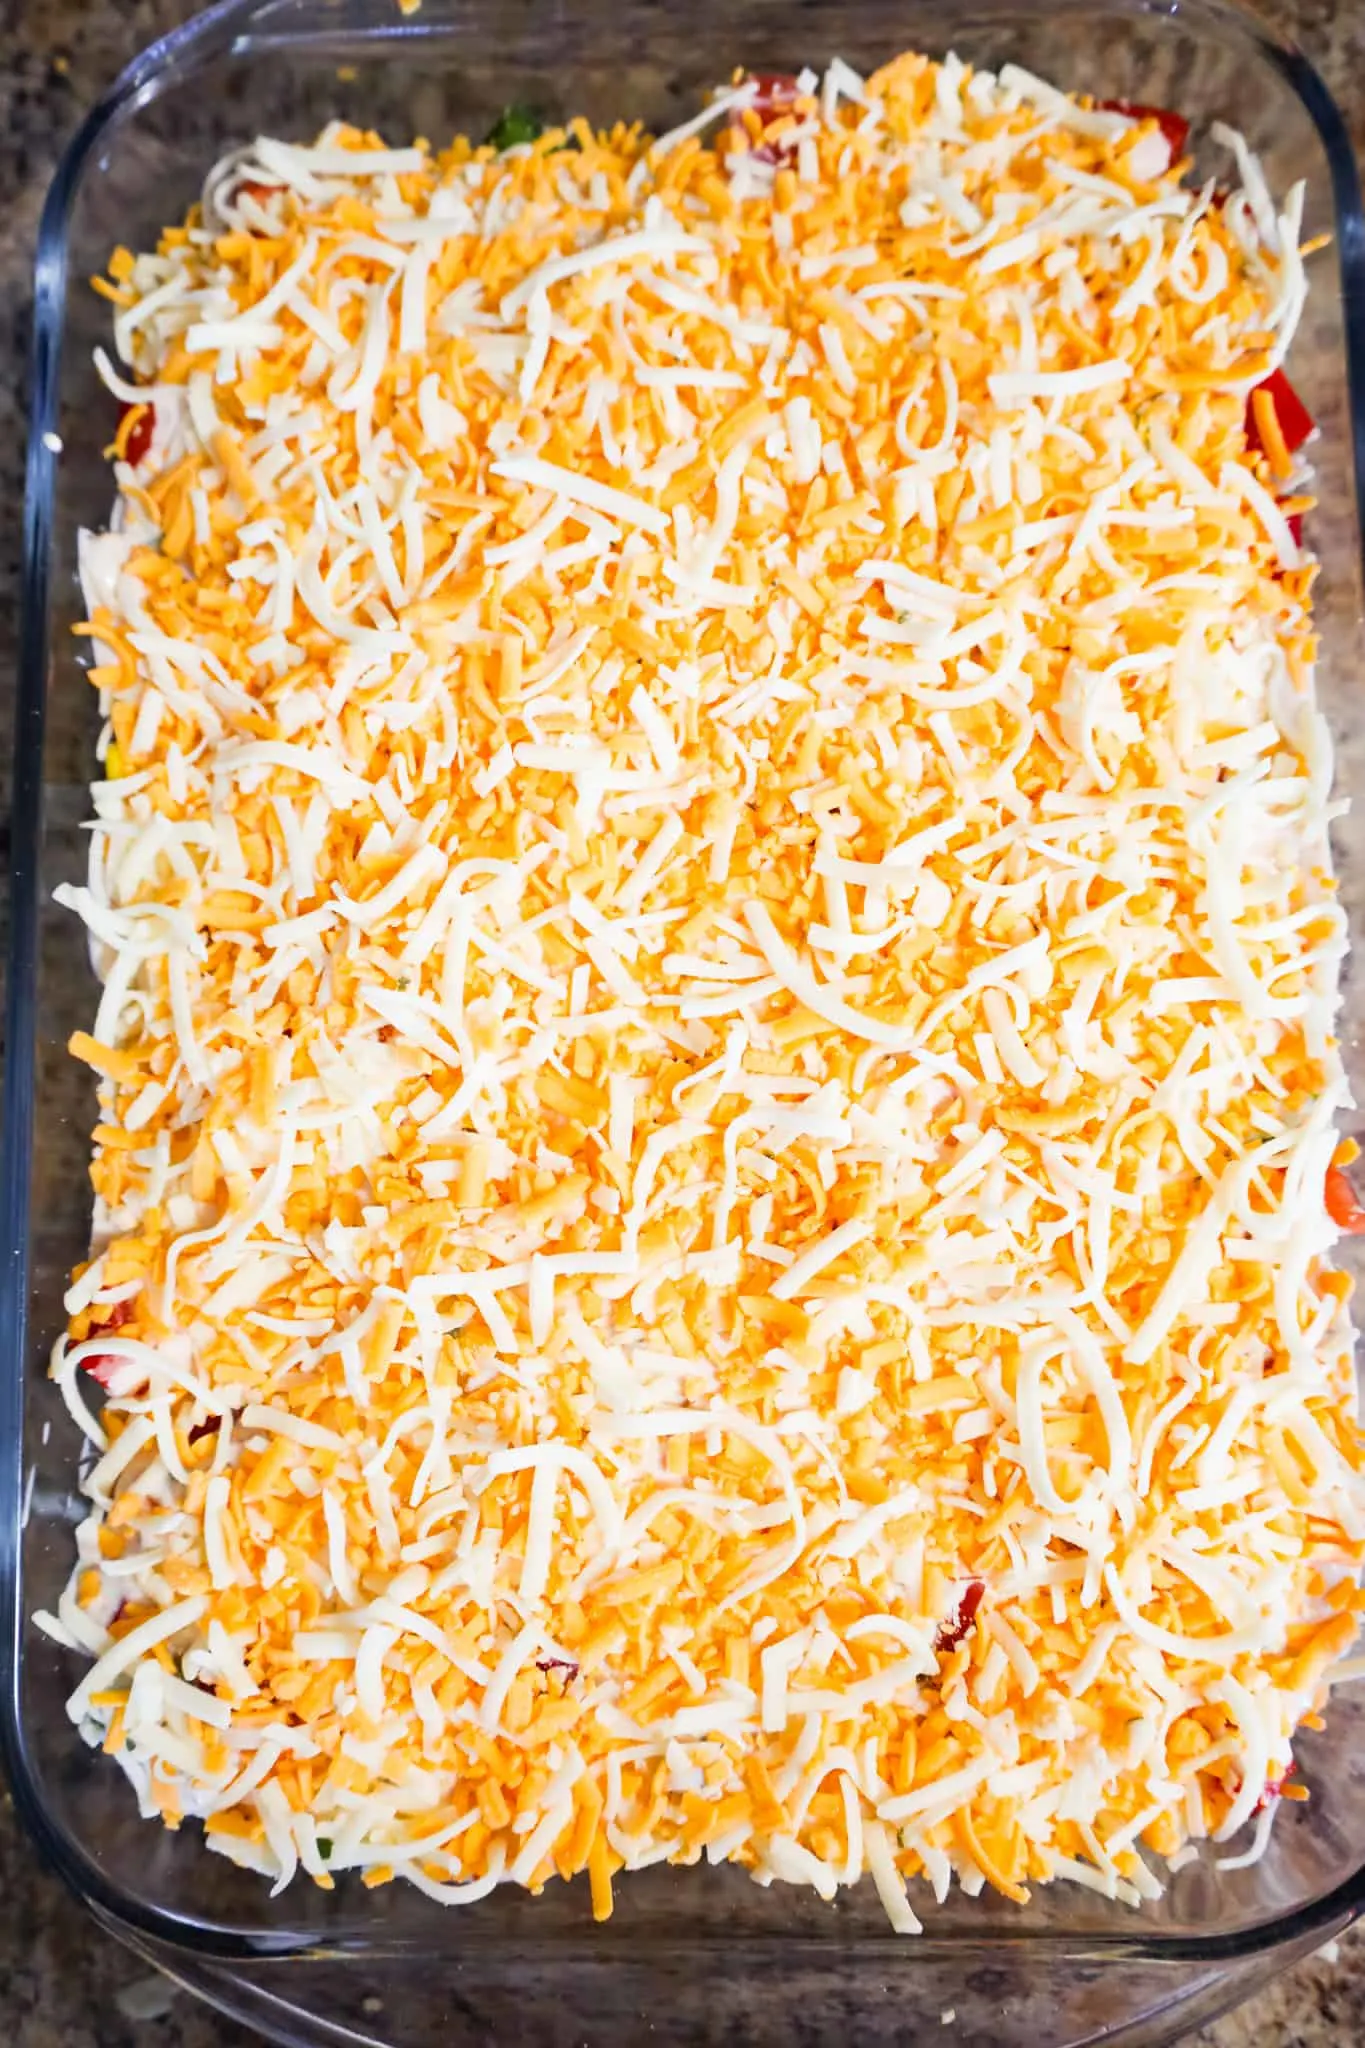 shredded cheese on top of cornbread salad in a baking dish